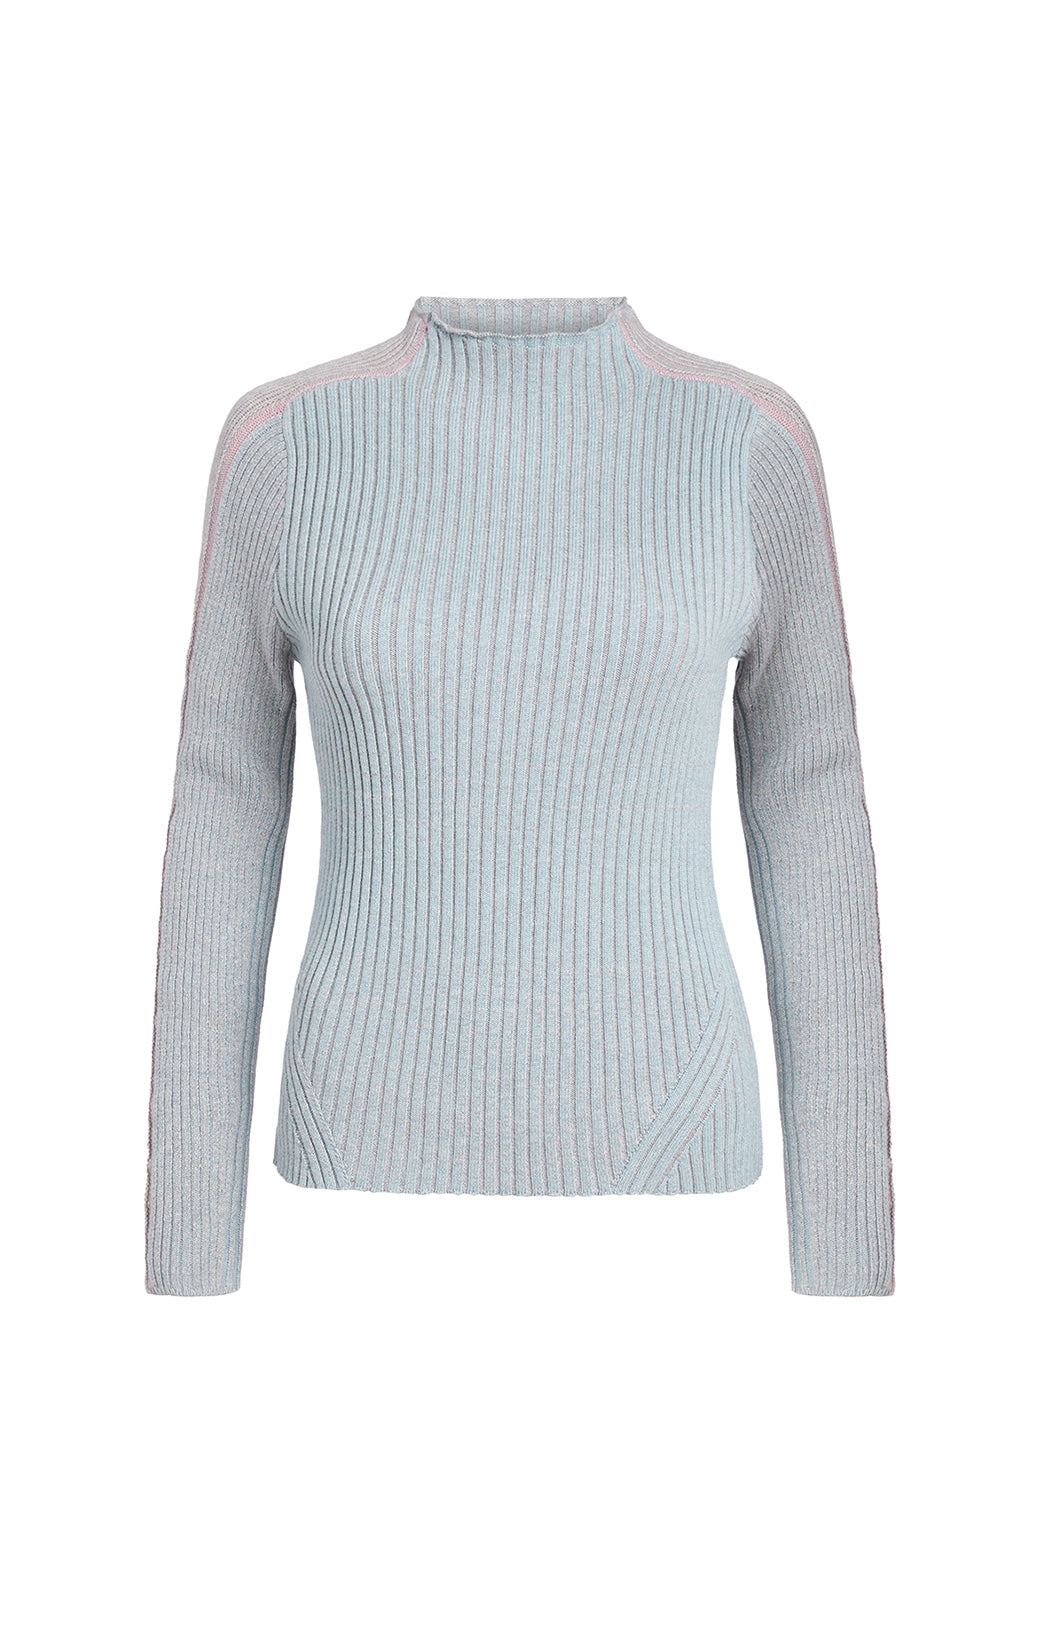 Troika - Colorblock V-Neck Sweater - Product Image